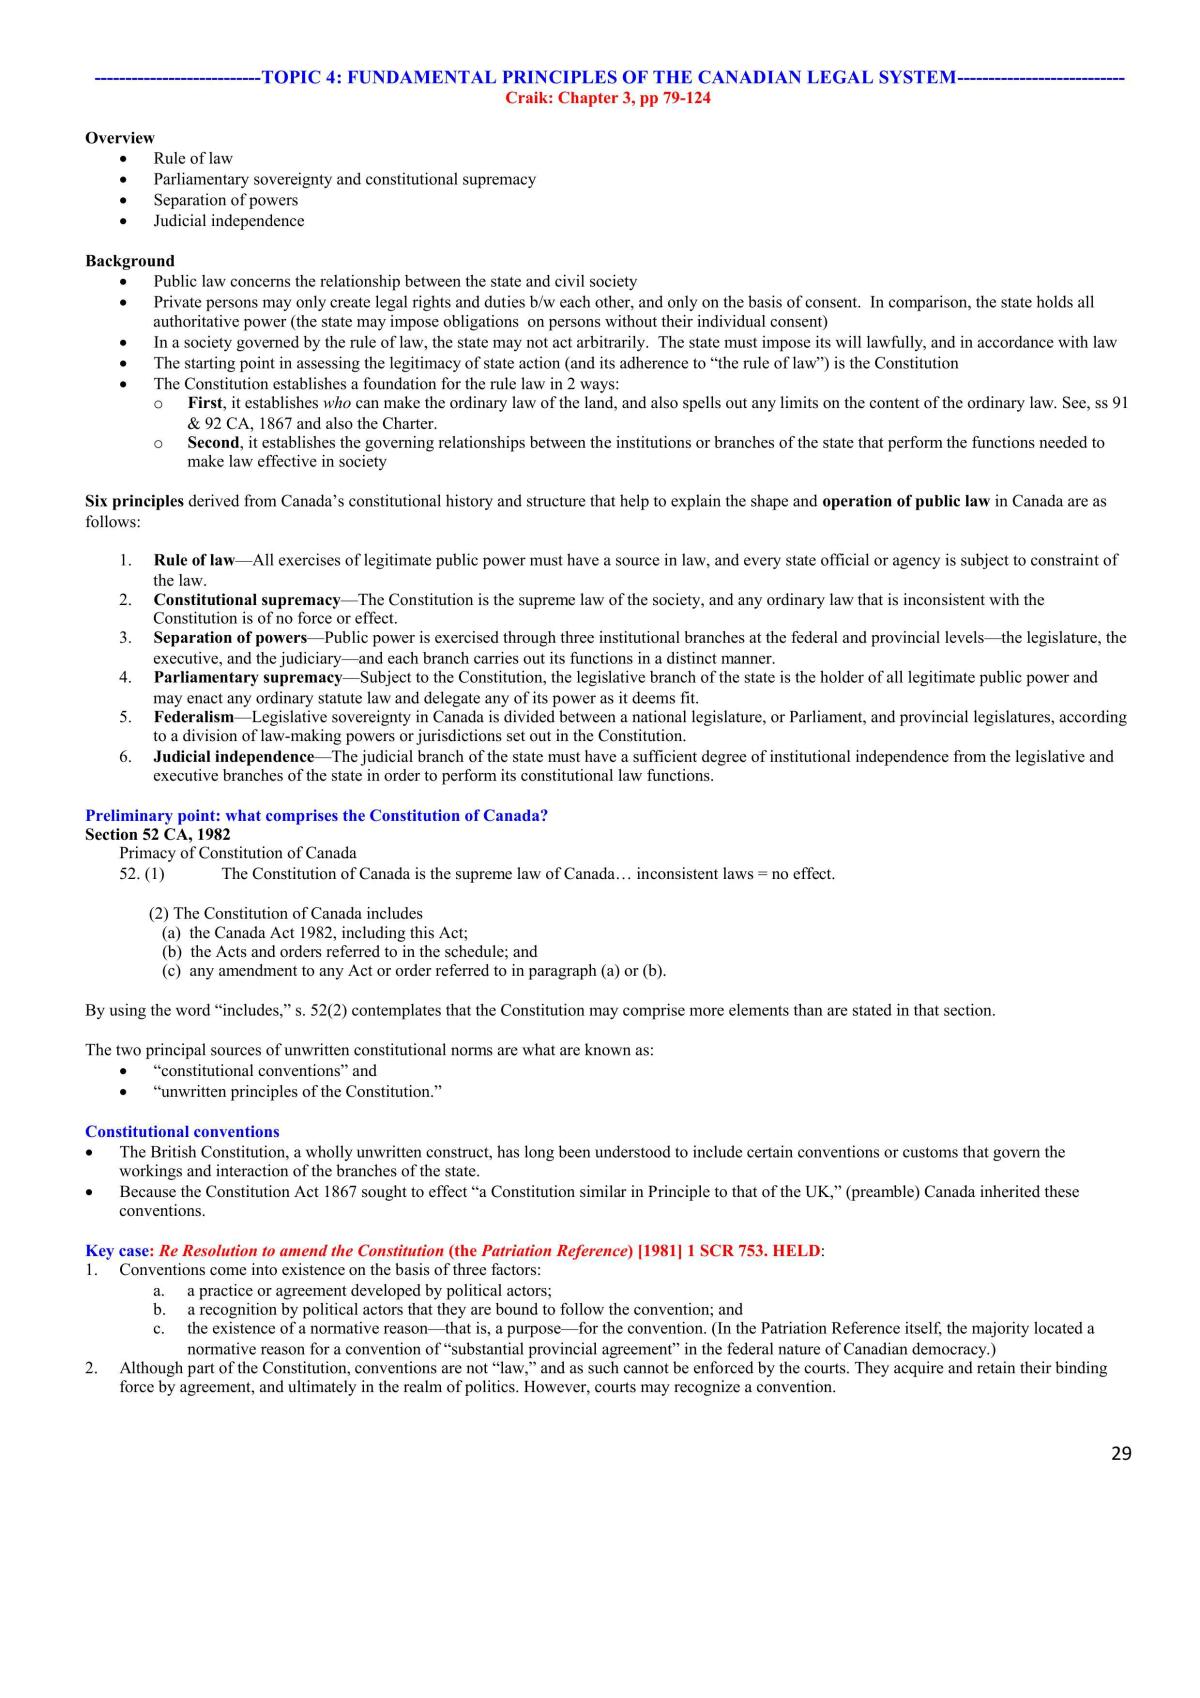 Foundations of Canadian Law Study Notes - Page 29